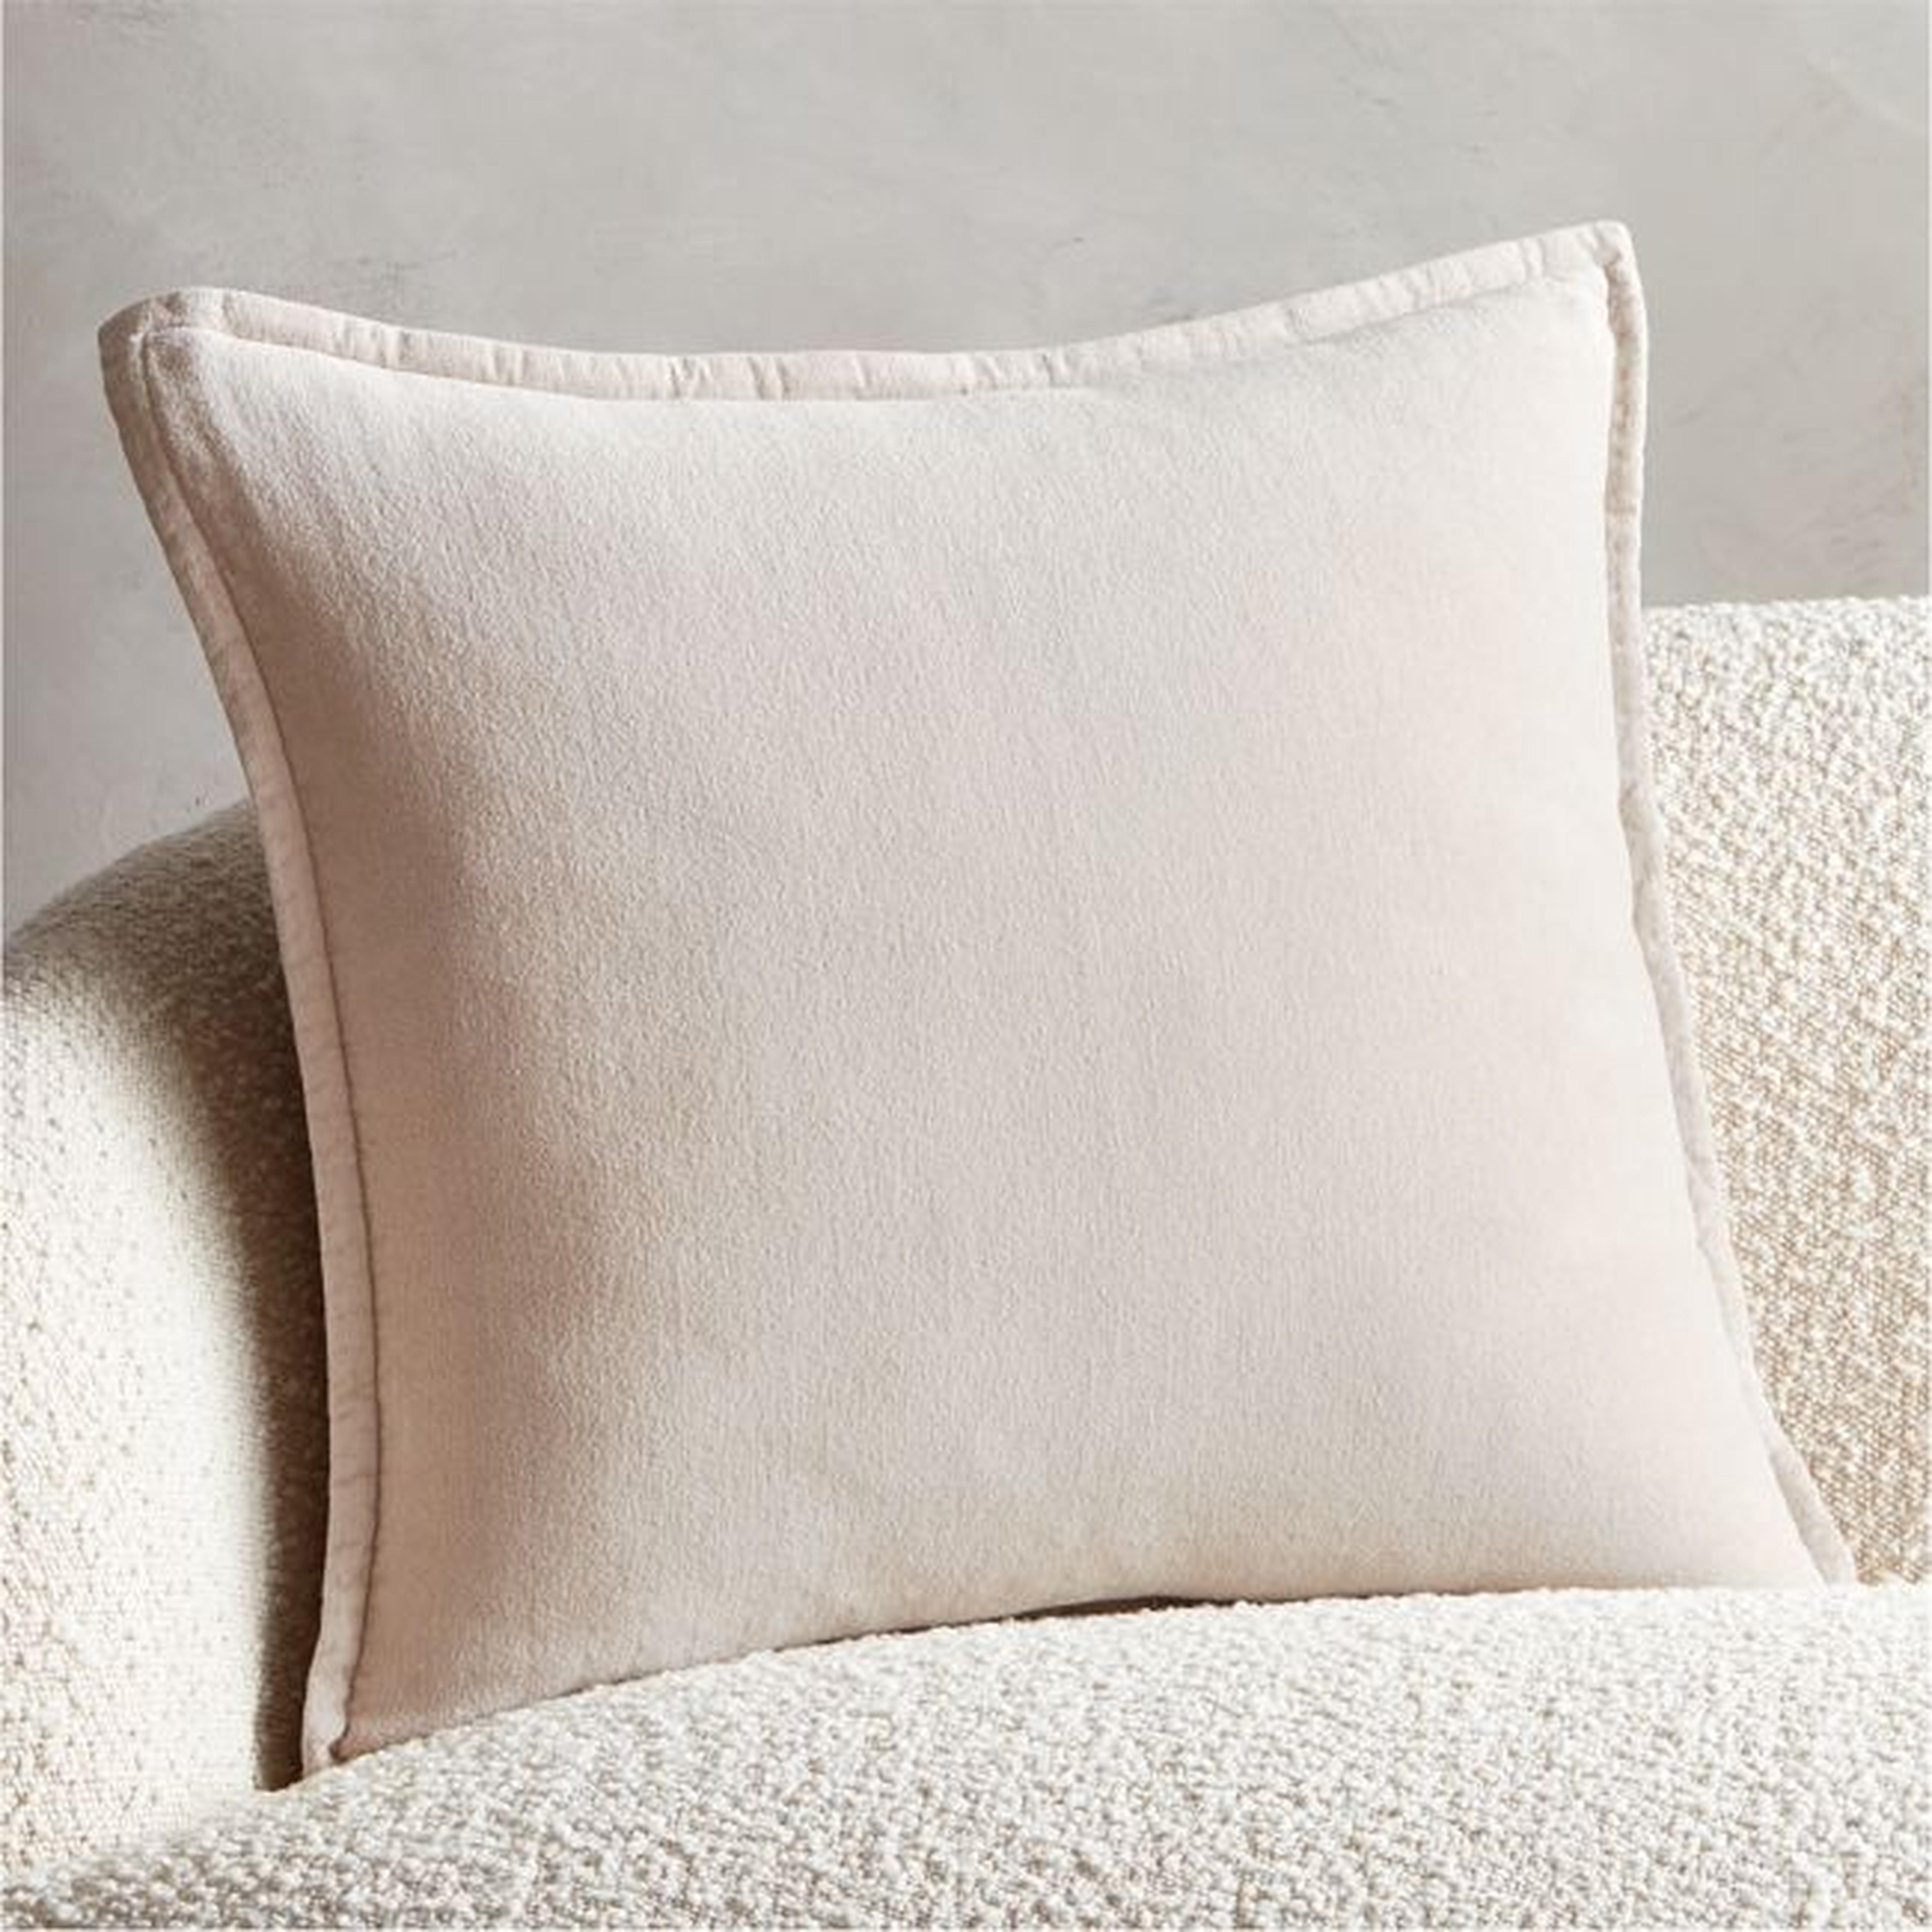 20" Ava Tan Pillow with Feather-Down Insert - CB2